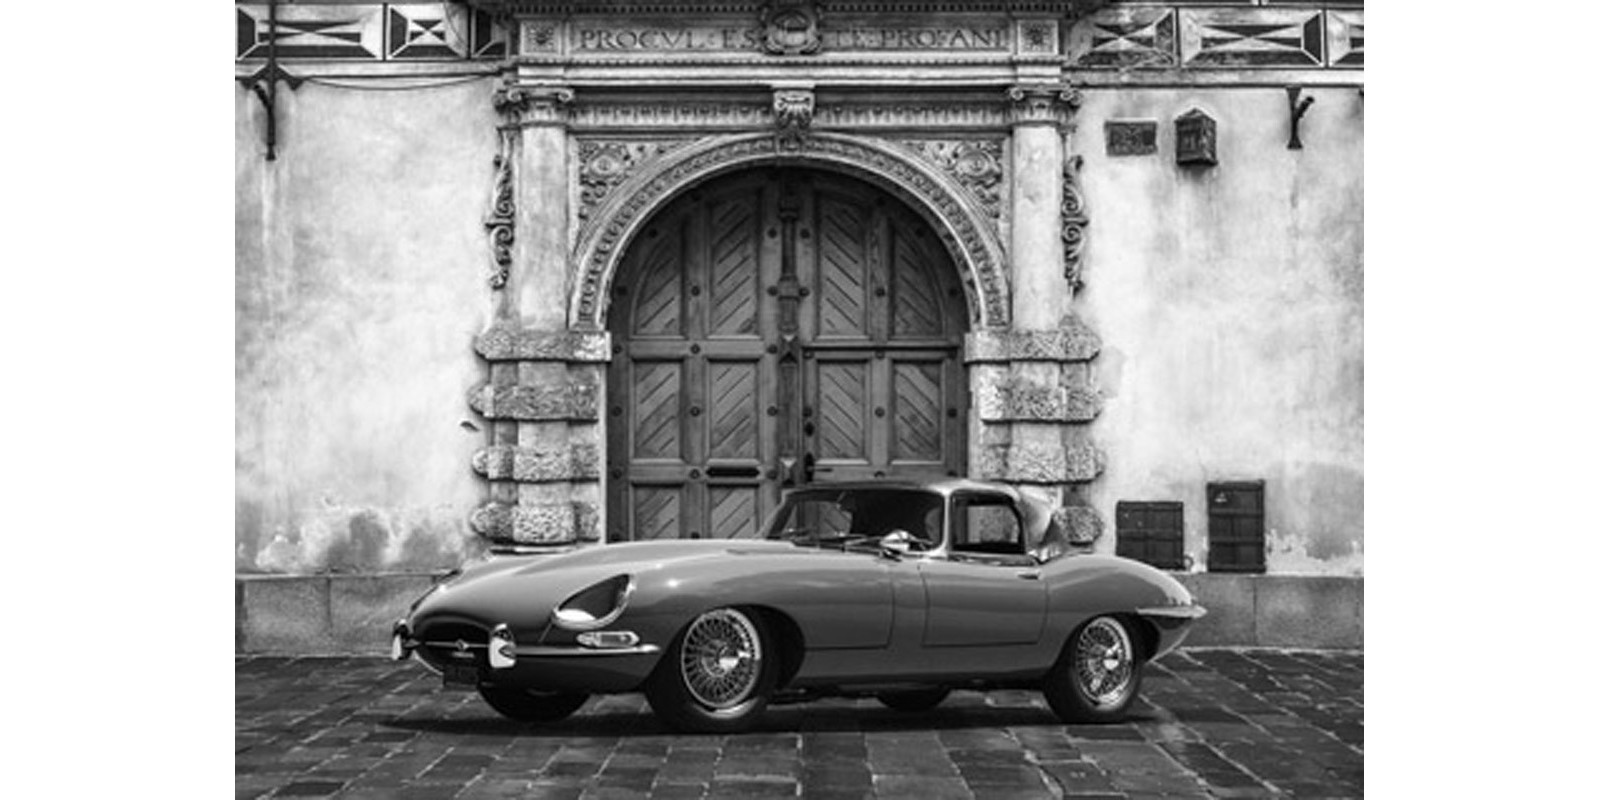 Gasoline Images - Roadster in front of Classic Palace (BW)